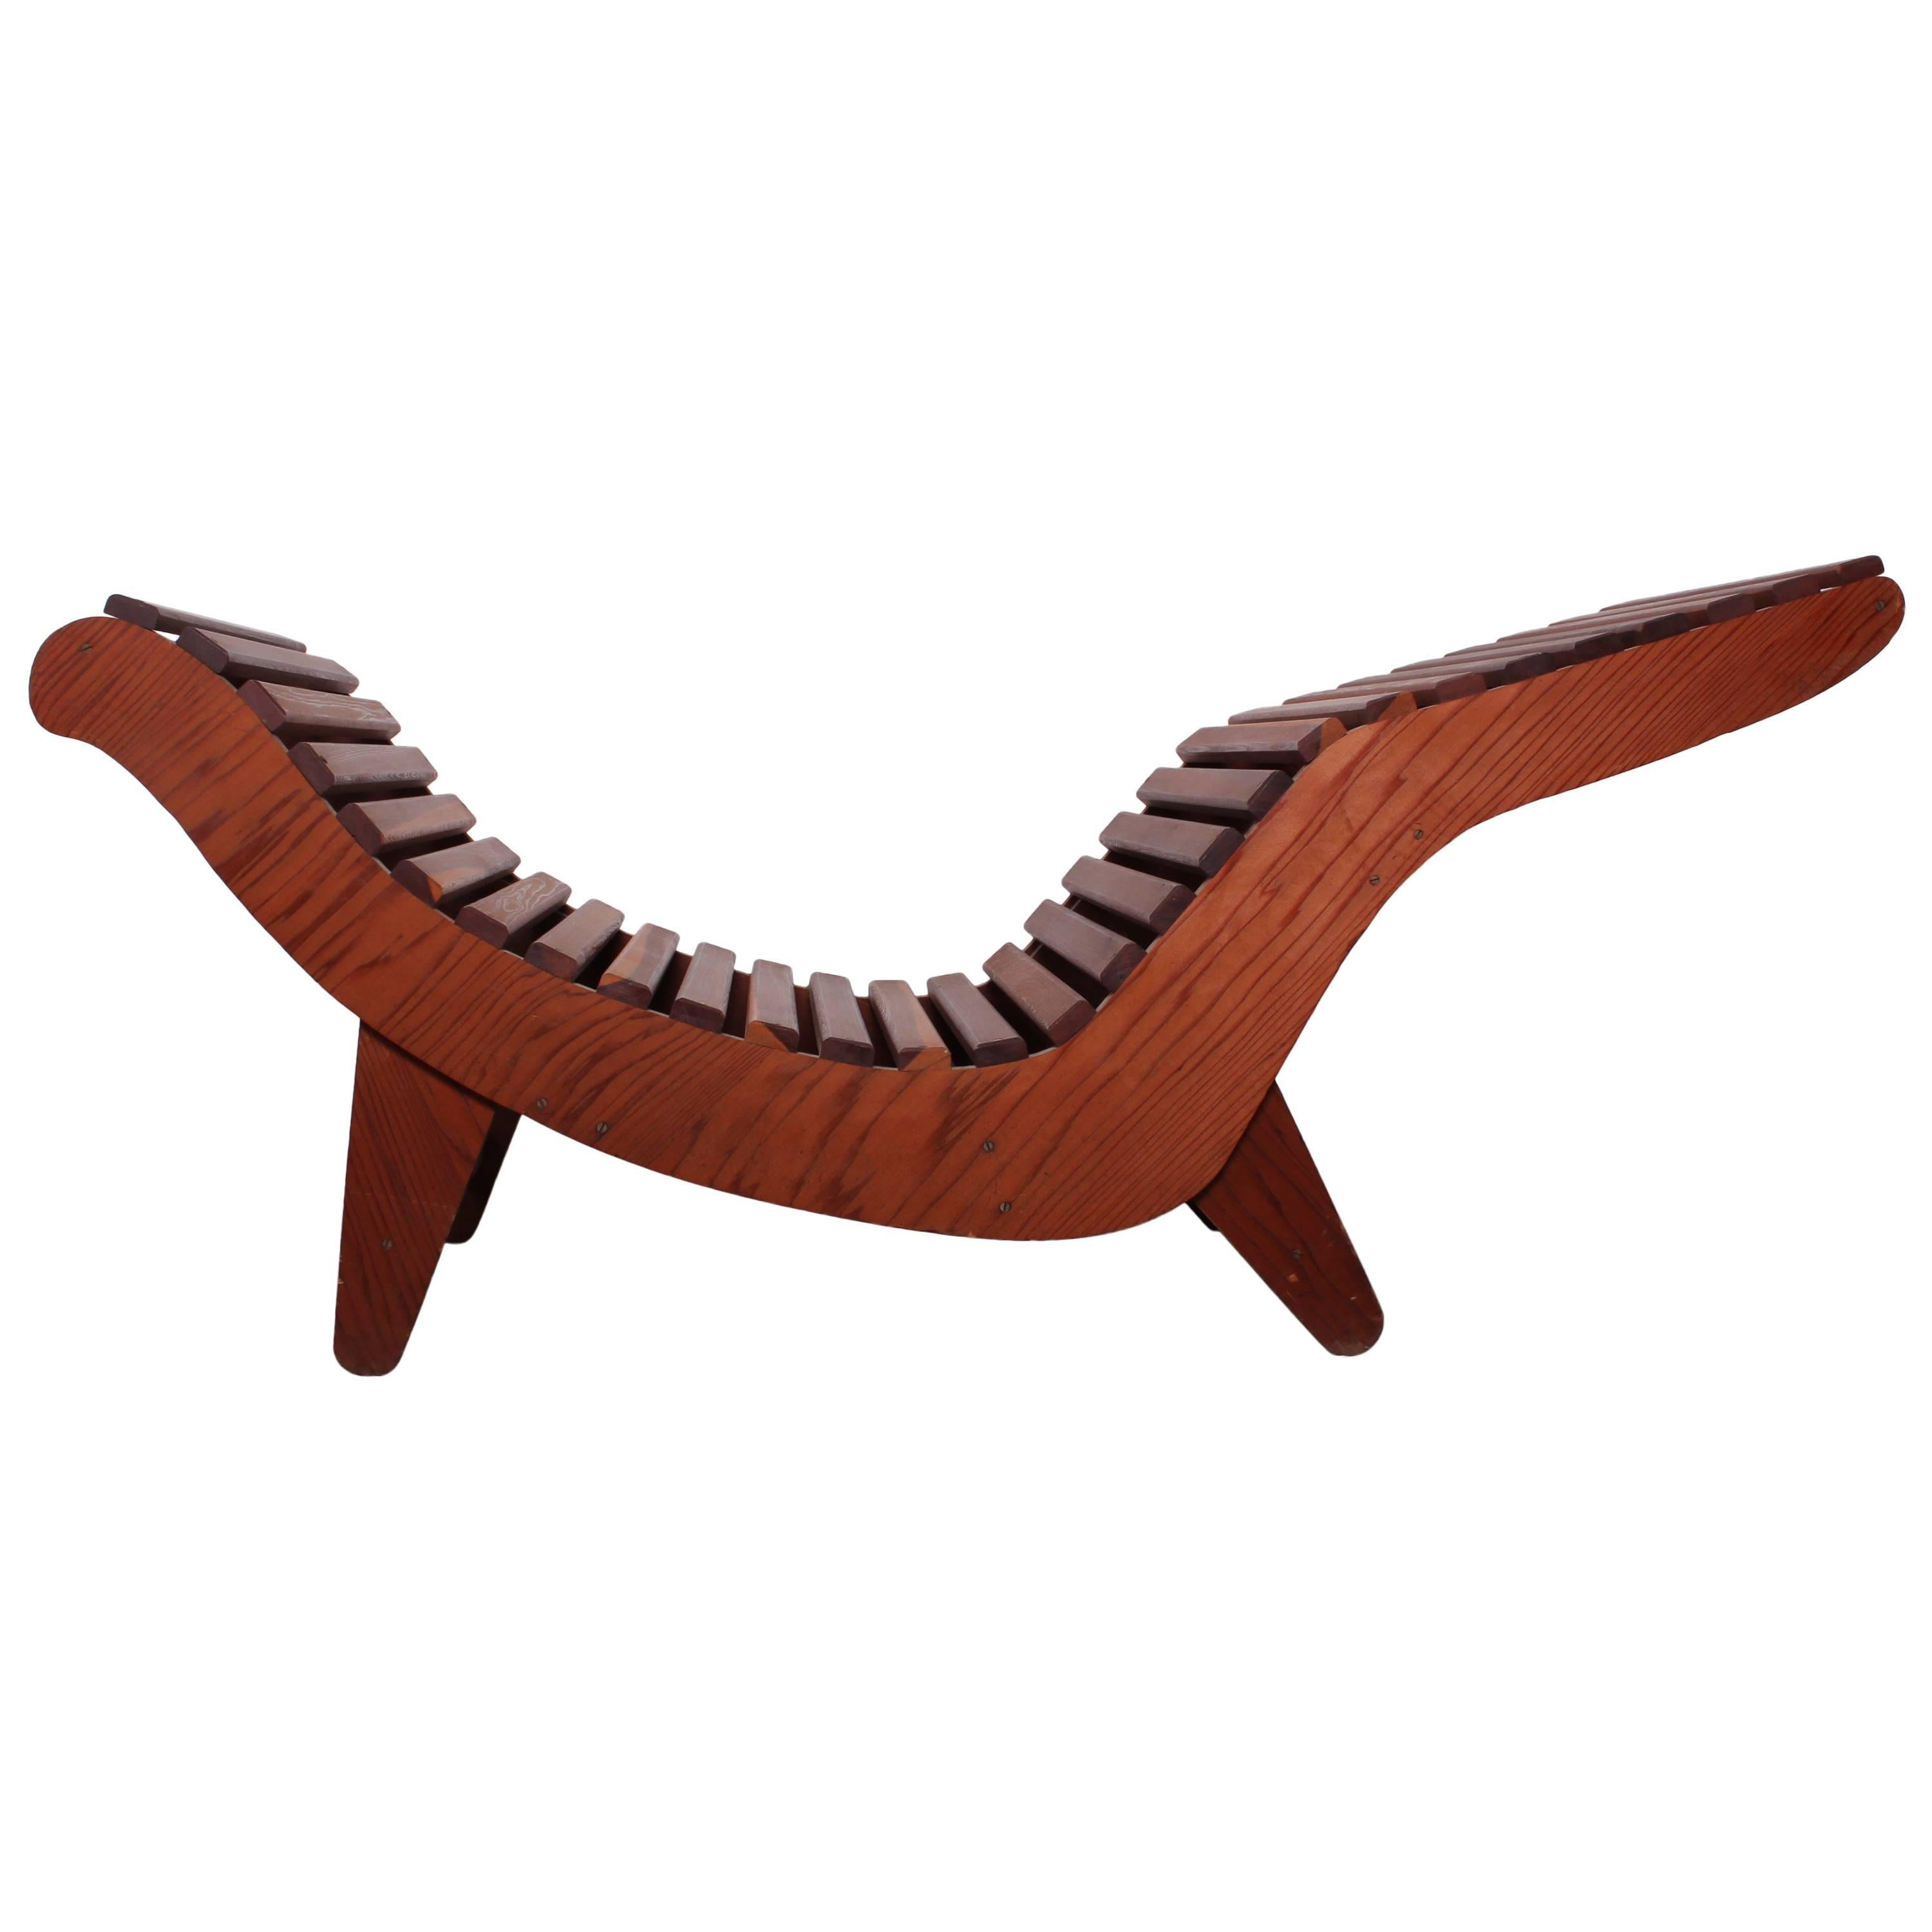 A rare C5 chaise with original wooden slats. Designed by Klaus Grabe.